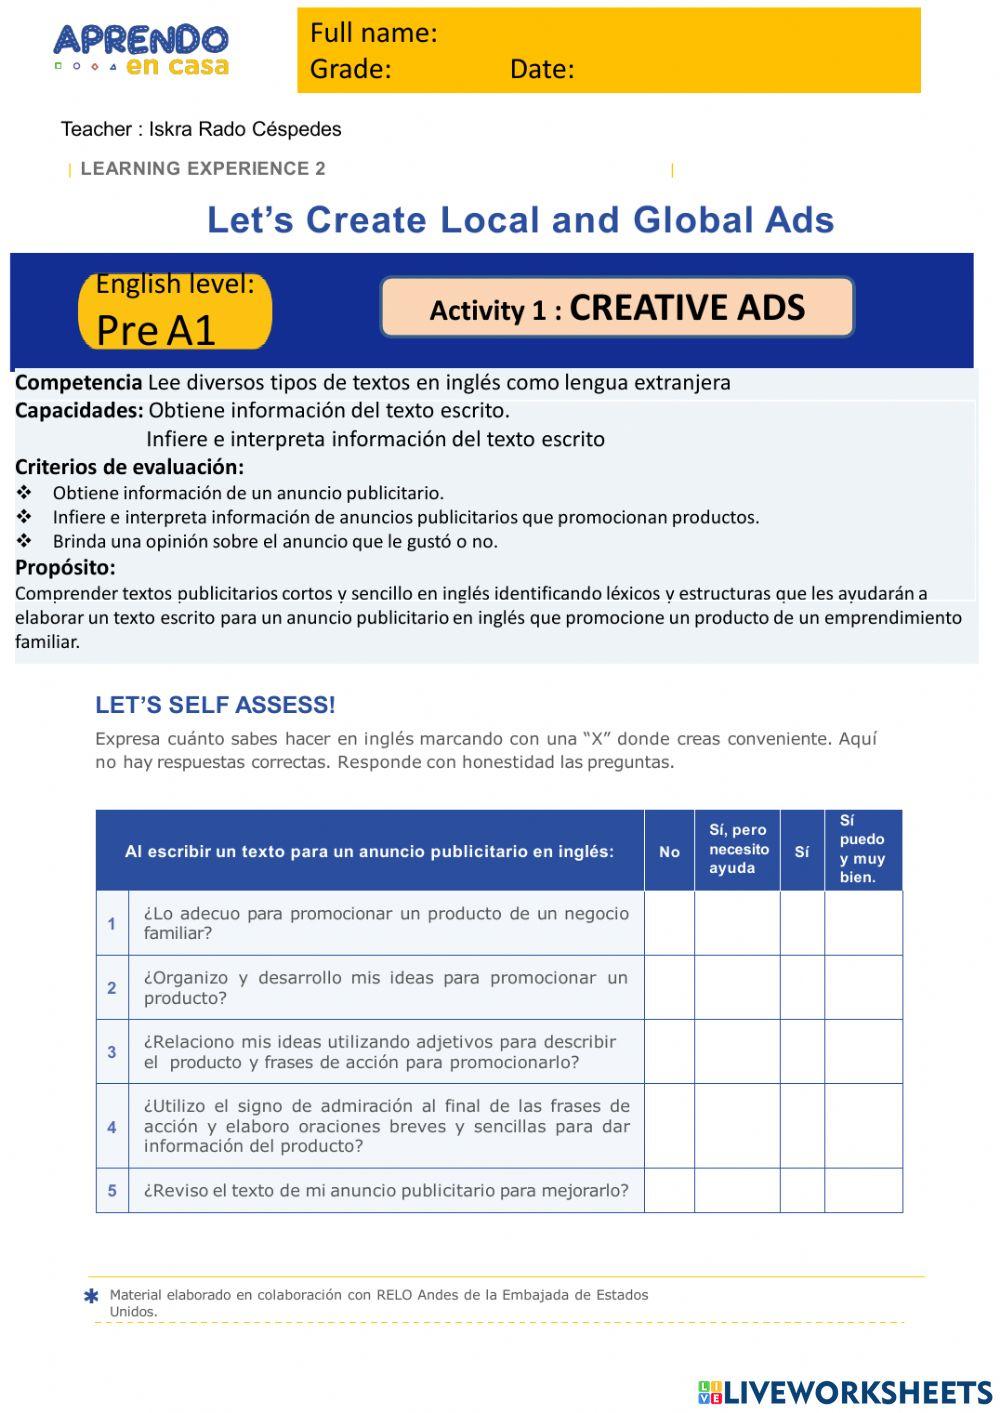 Activity 1: Let´s create local and Global Ads prea1 EDA2 irc